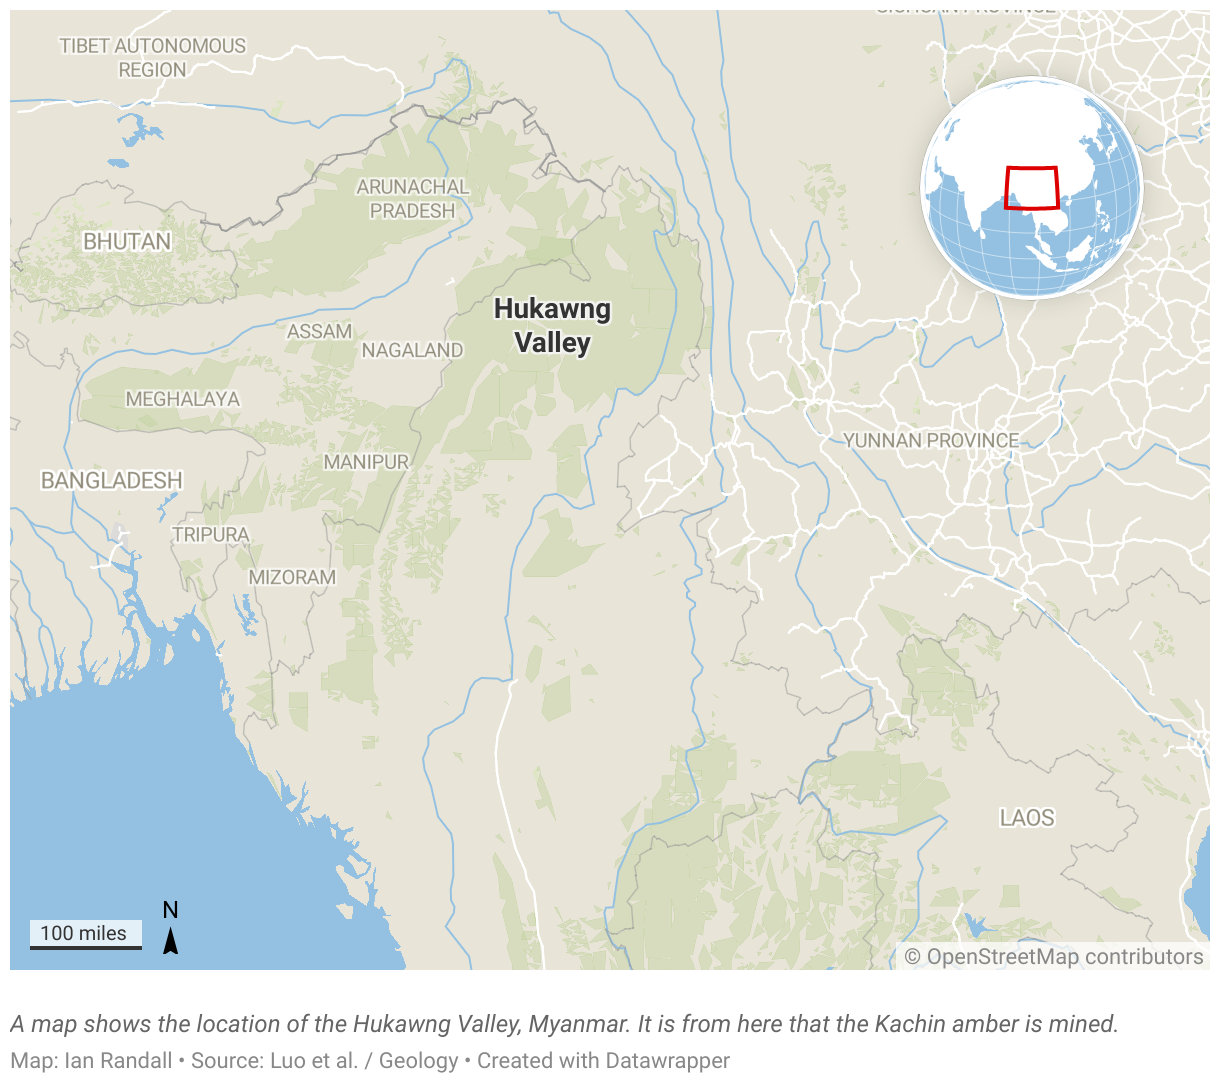 A map shows the location of the Hukawng Valley, Myanmar.